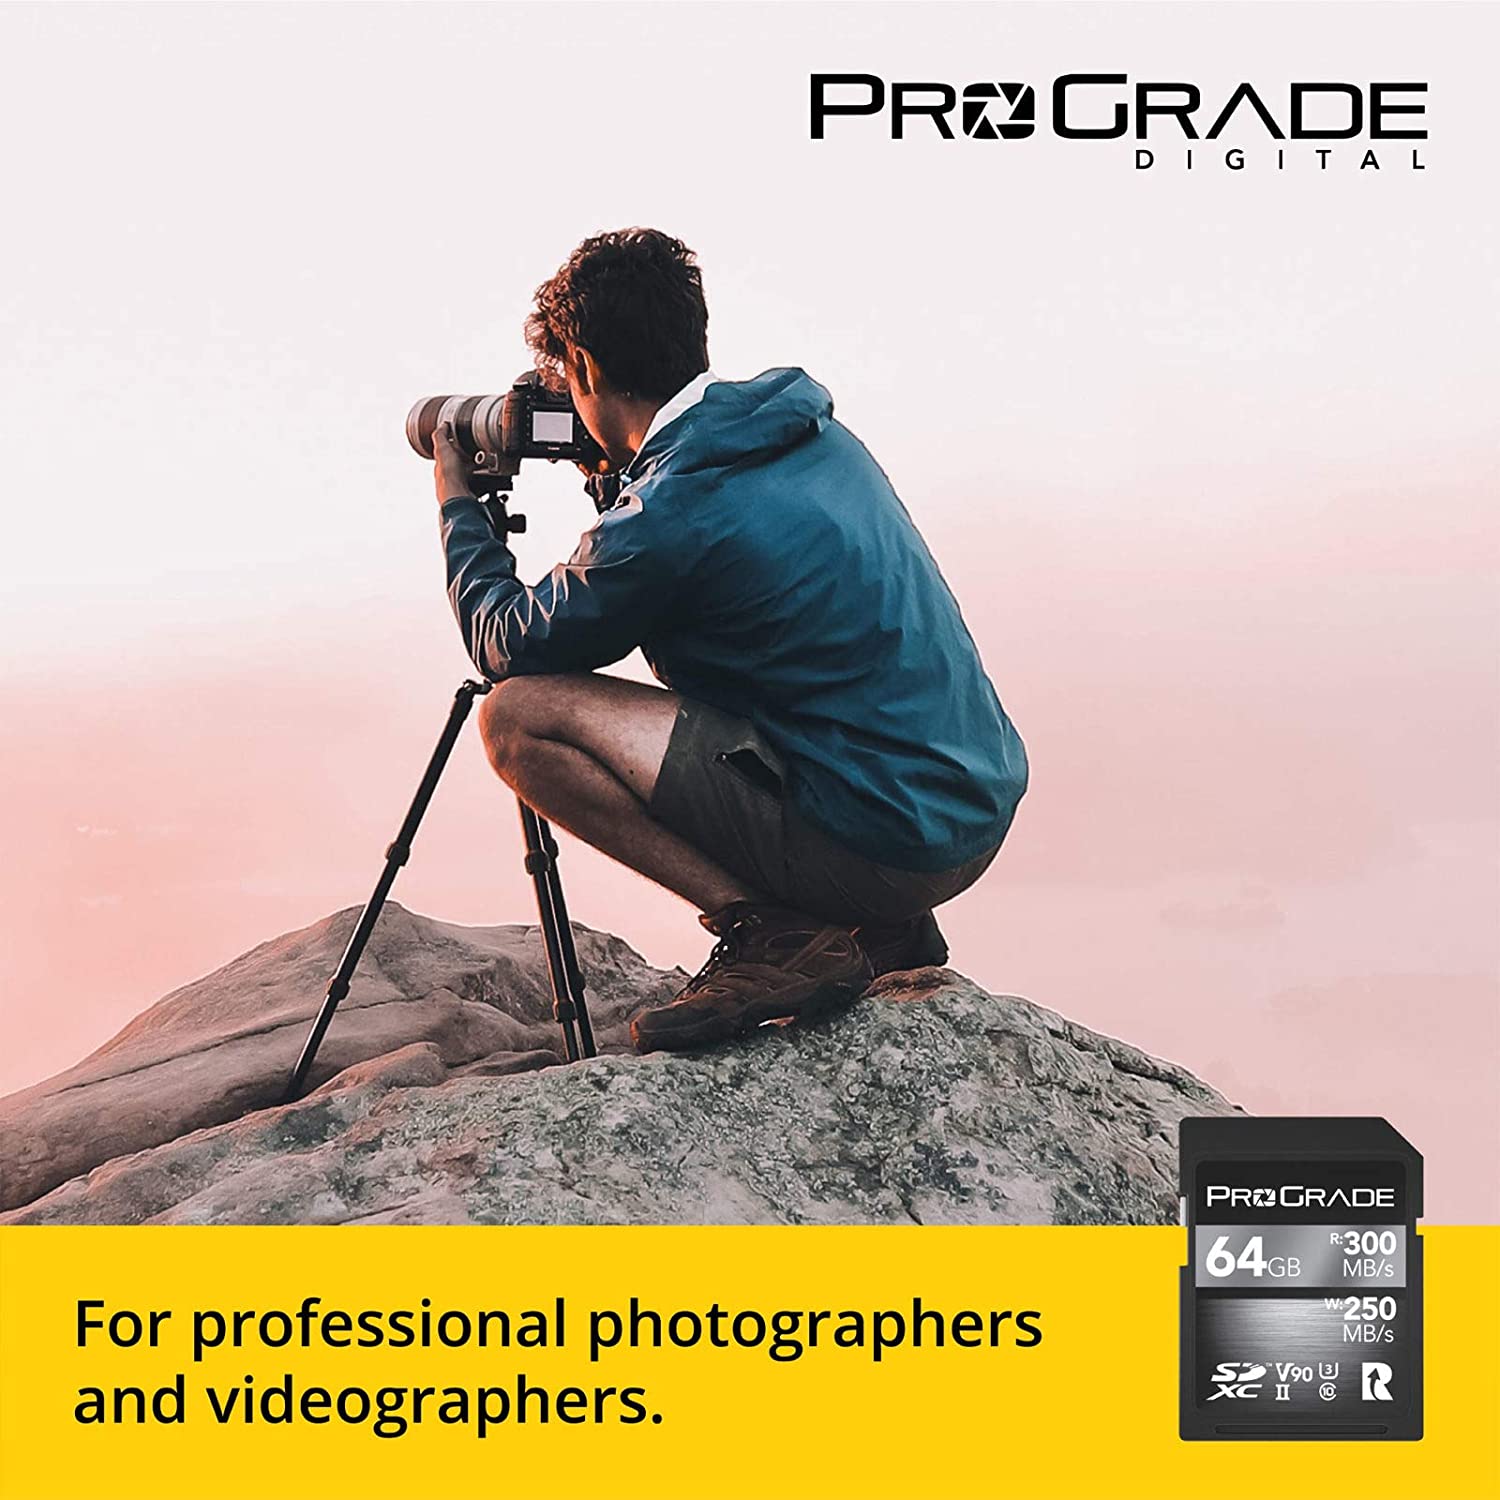 Just One Day Left for This ProGrade Digital Exclusive Special Offer